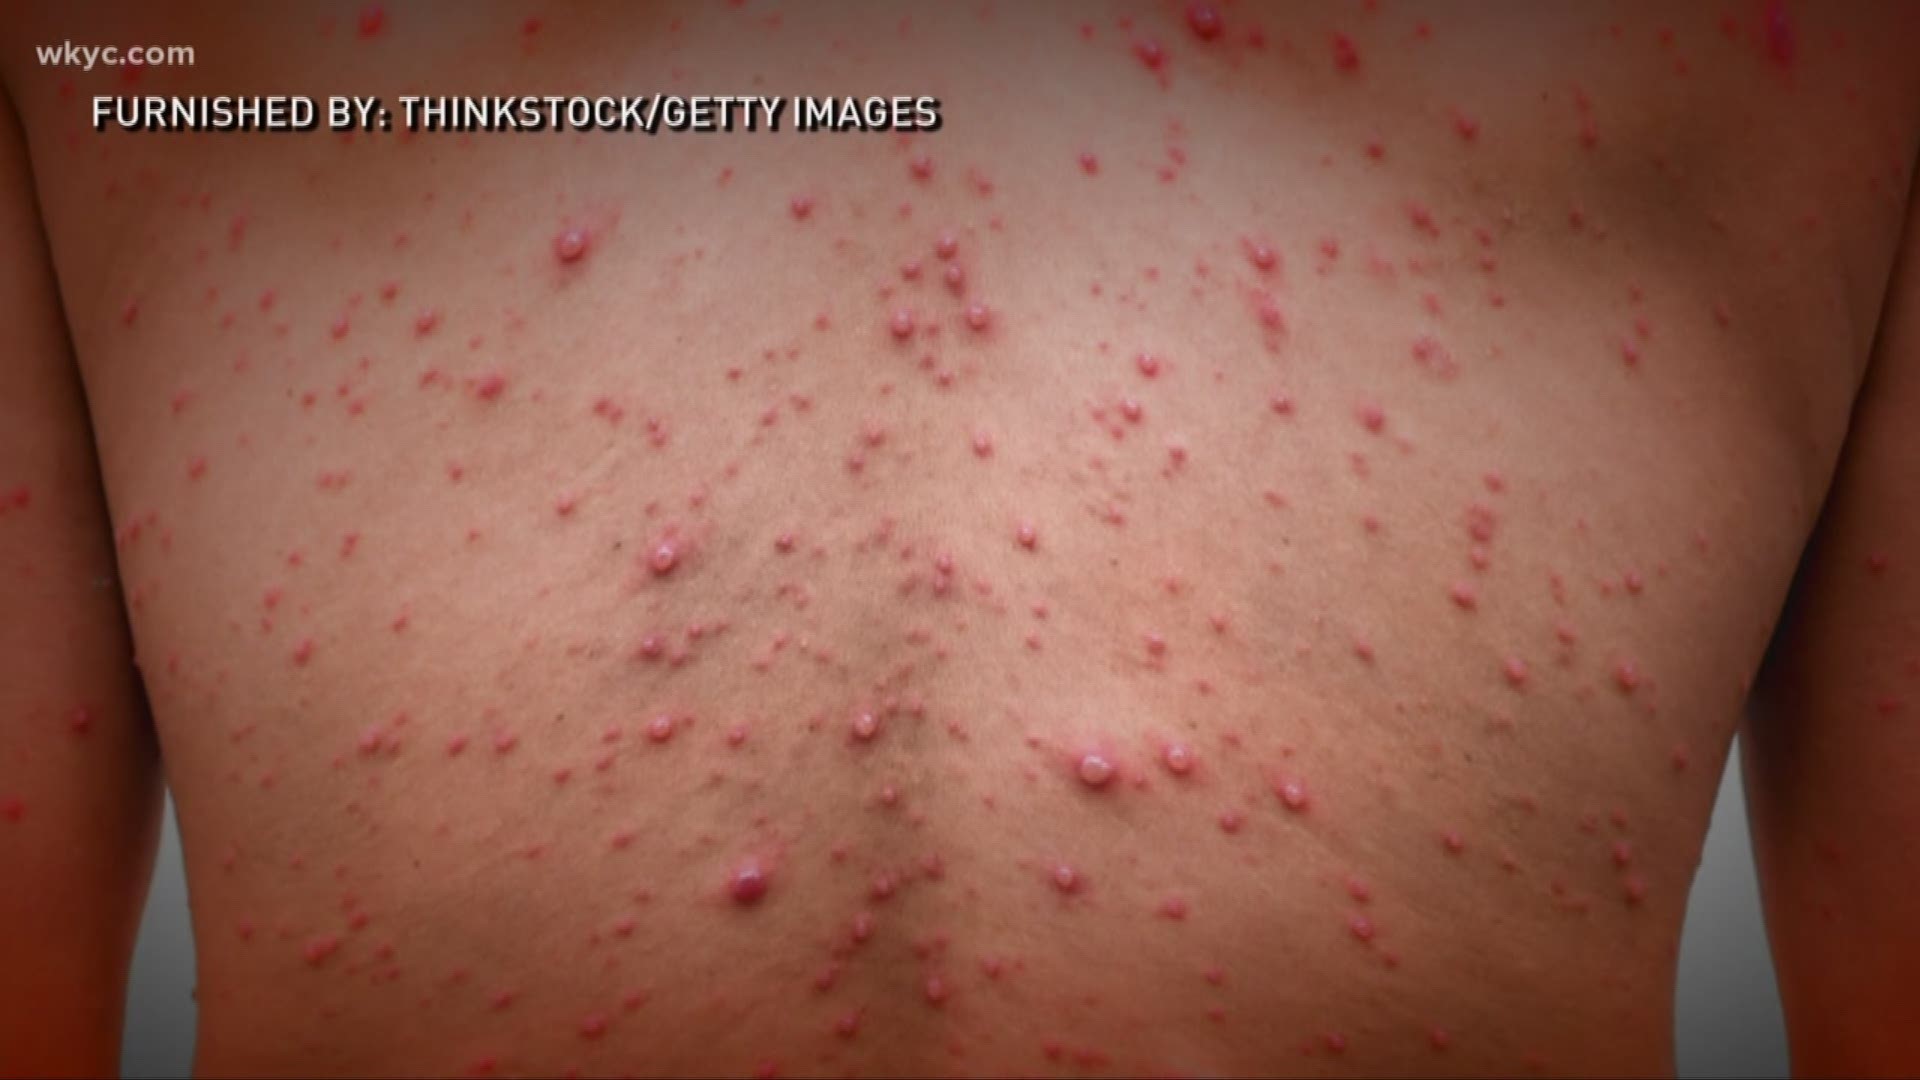 Nov. 7, 2018: You've probably heard that some people purposely expose their children to chicken pox. But doctors are warning parents about 'chicken pox parties,' saying this is not something to take lightly.